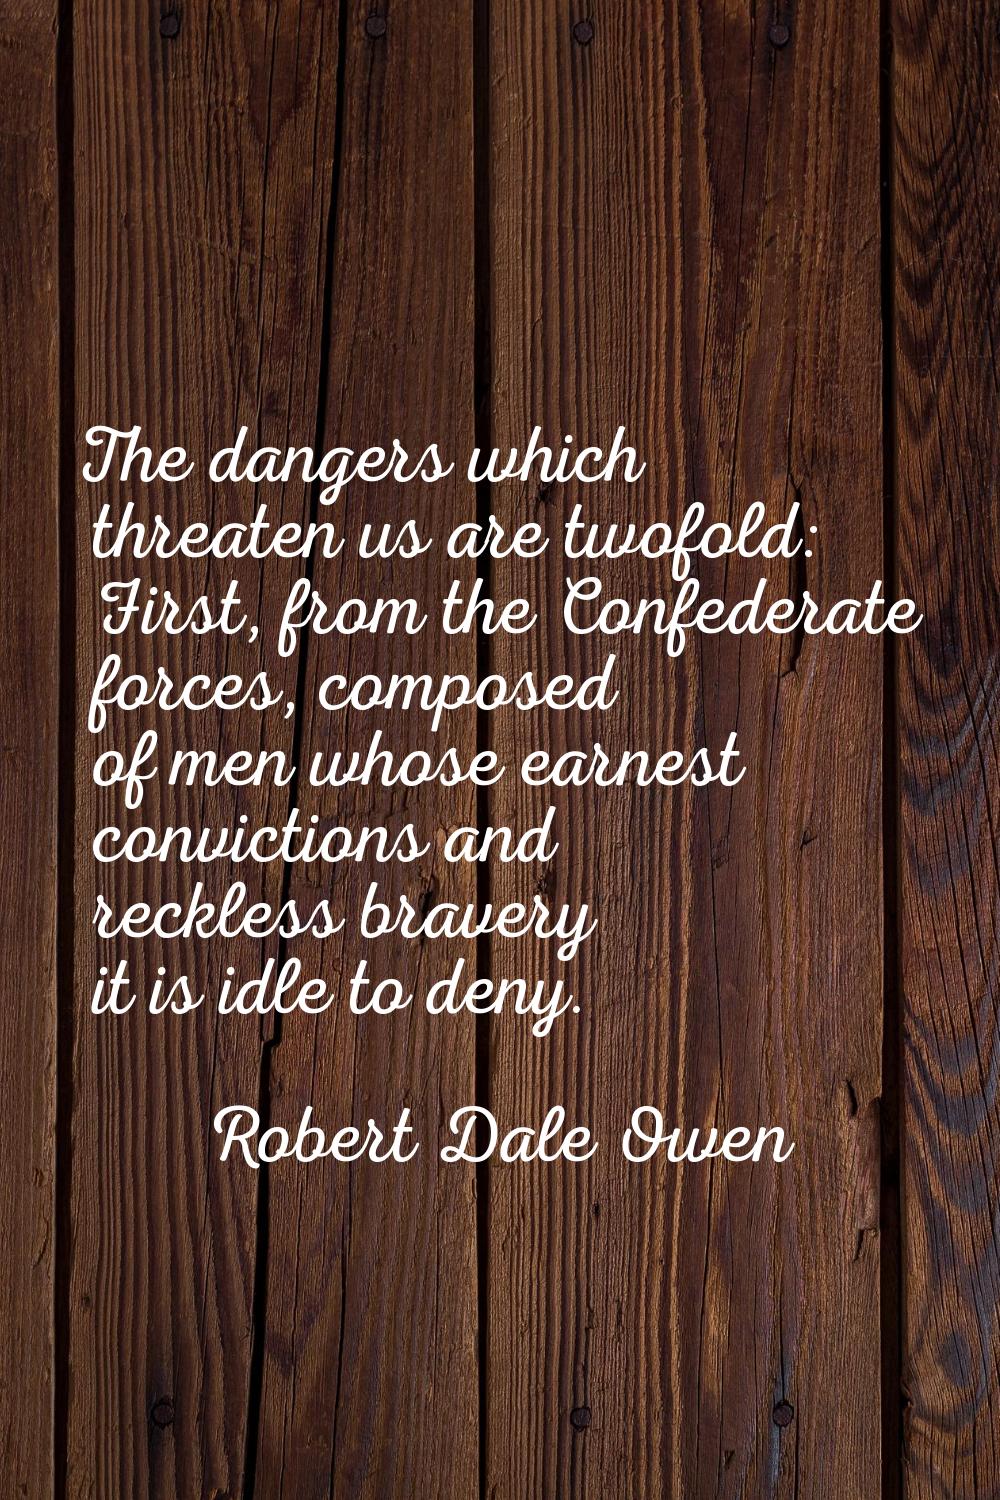 The dangers which threaten us are twofold: First, from the Confederate forces, composed of men whos